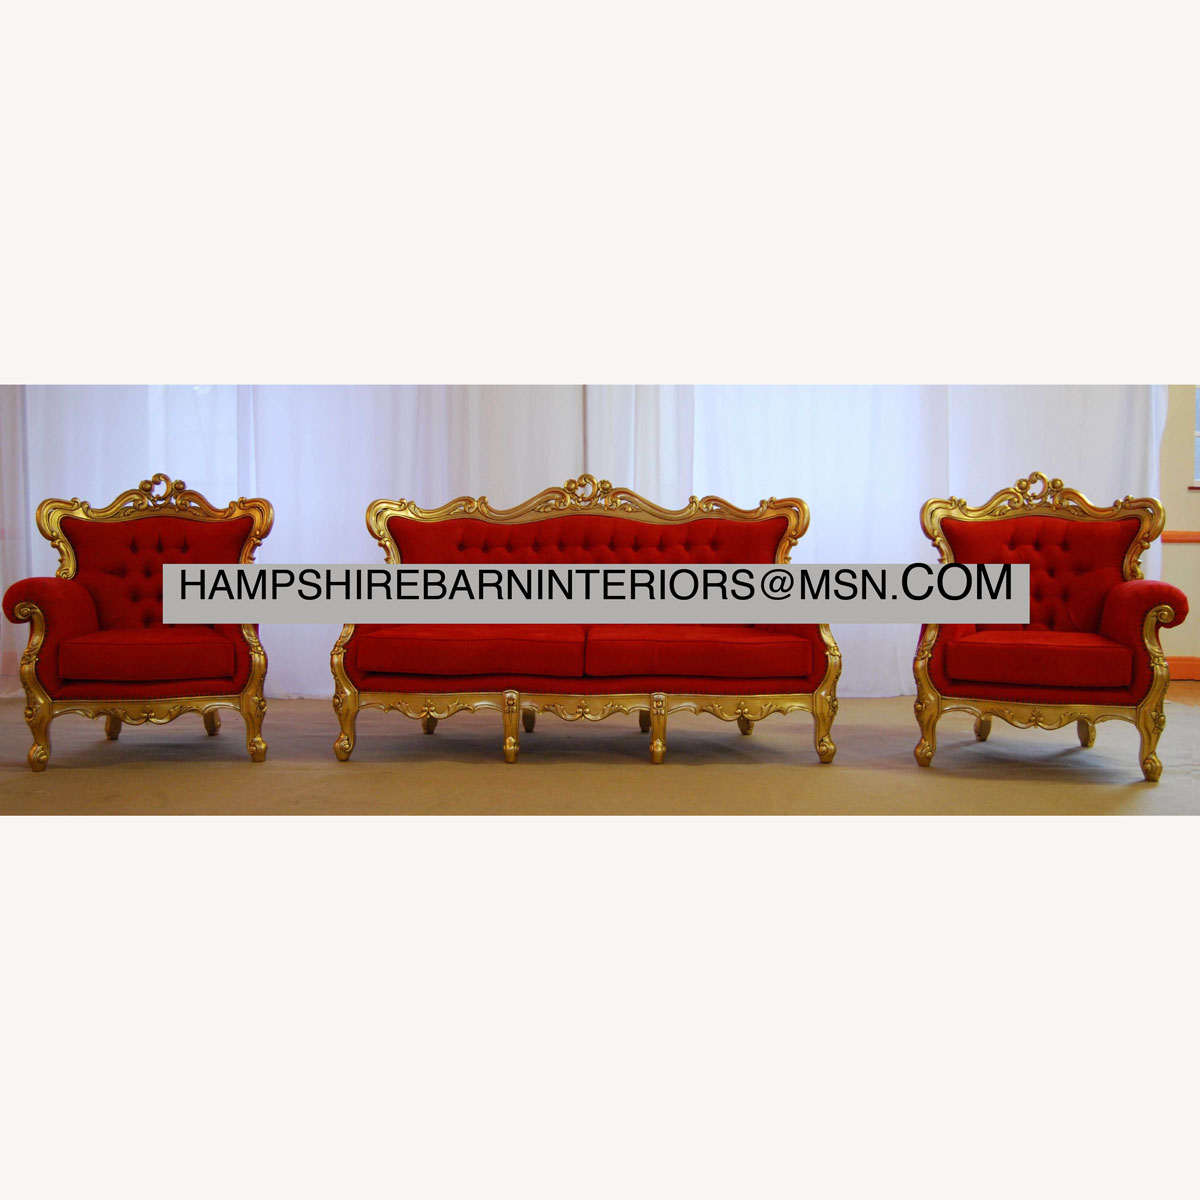 Shaadi Sofa And Two Armchairs In Gold And Red 1 - Hampshire Barn Interiors - Shaadi Sofa And Two Armchairs In Gold And Red -